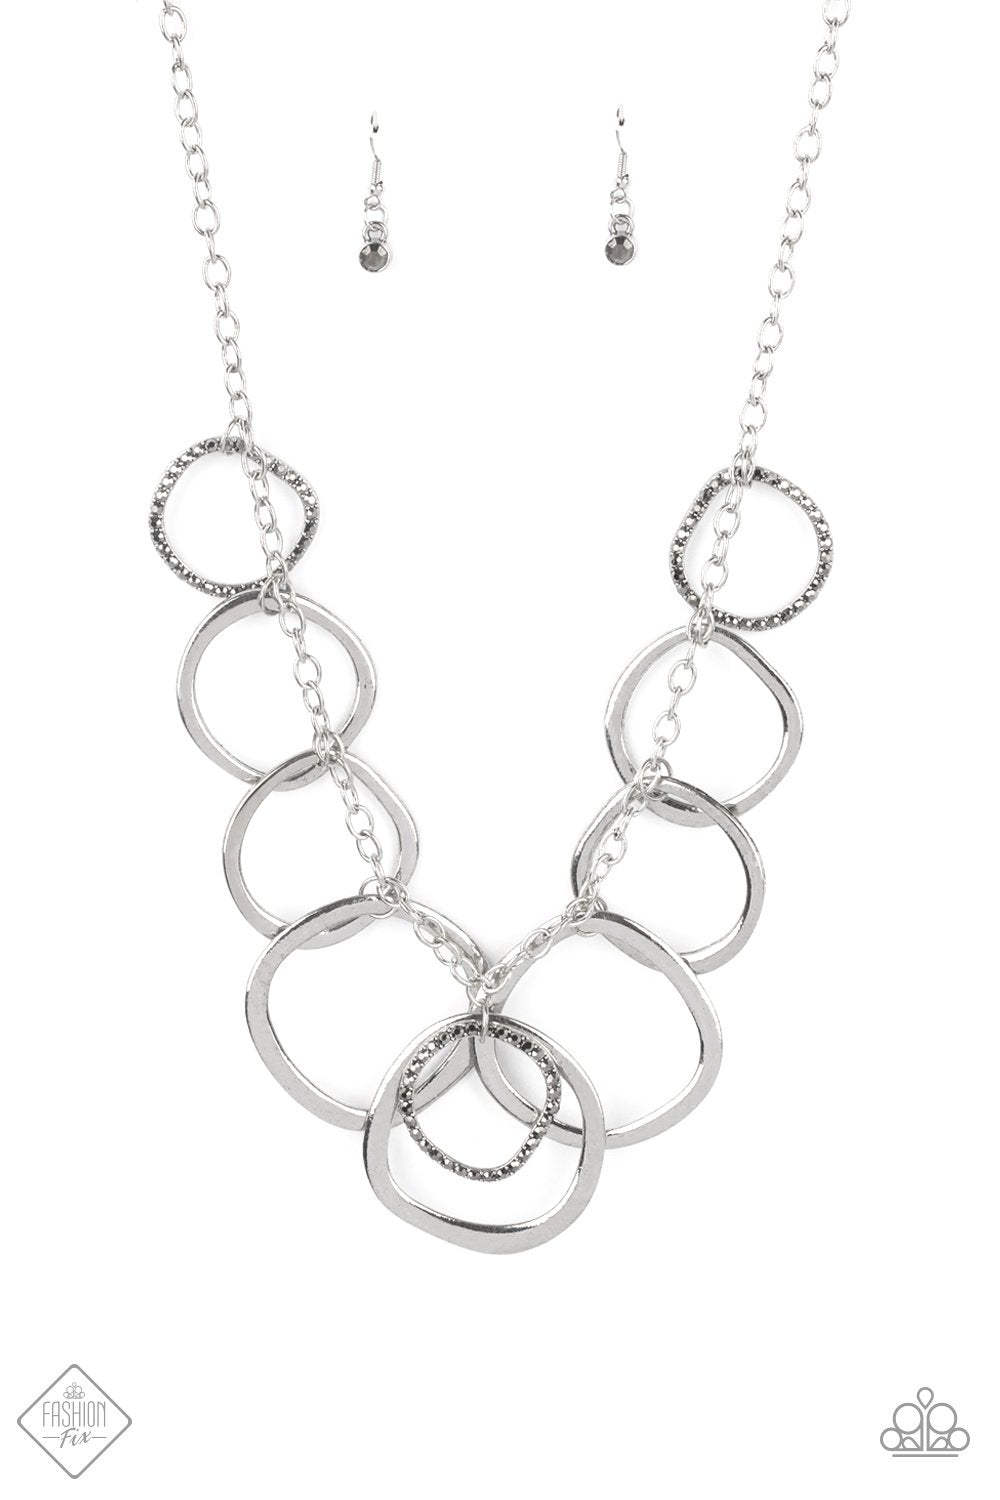 Paparazzi Dizzy With Desire Silver Short Necklace - Fashion Fix Magnificent Musings June 2021